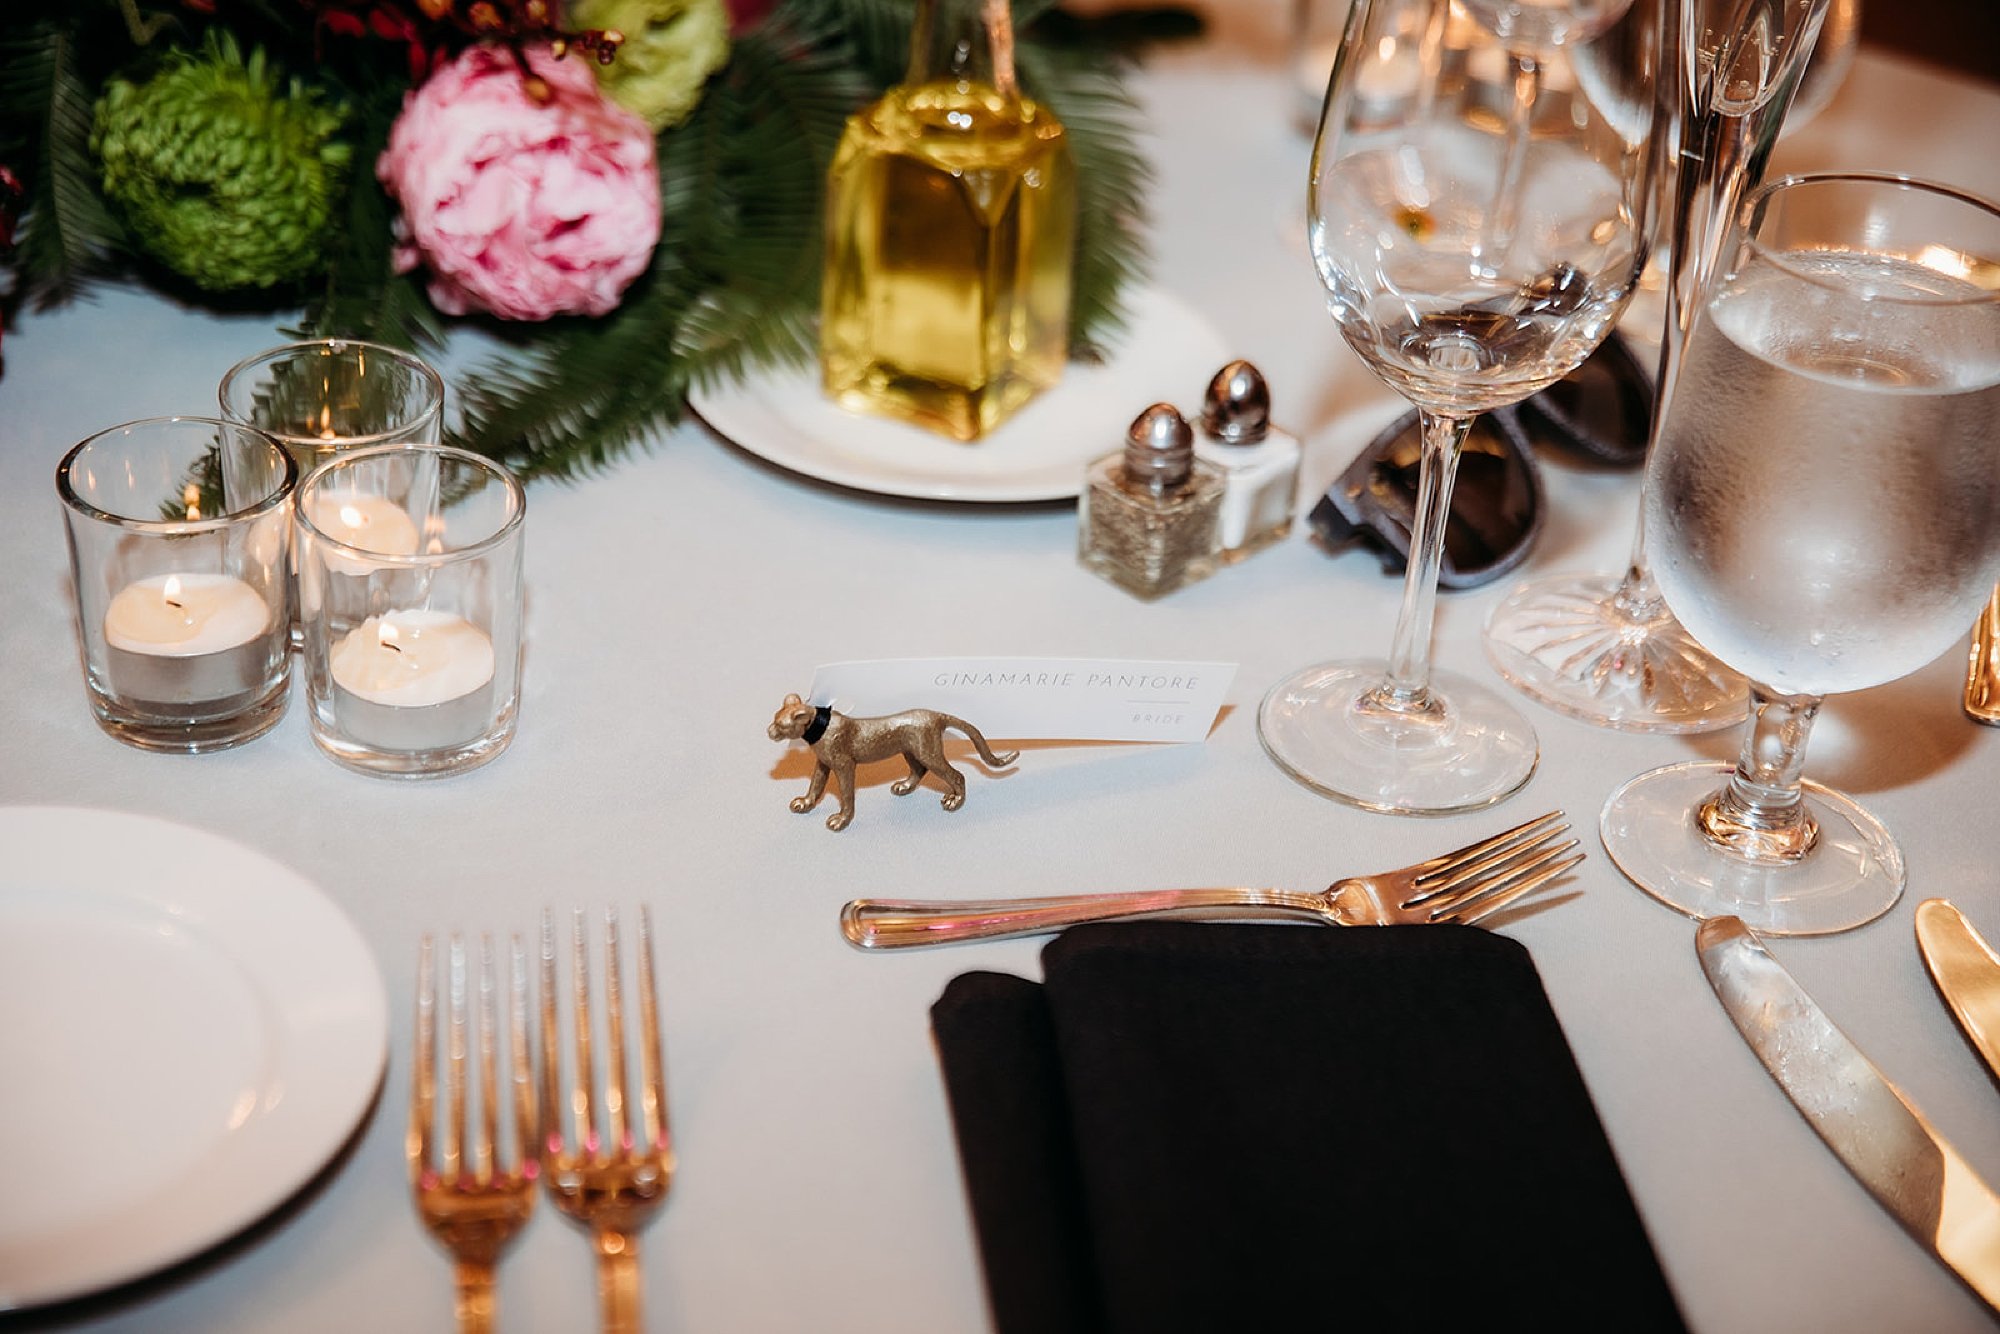 place setting with gold silverware for The Bronx Zoo wedding reception at the Old Lion House